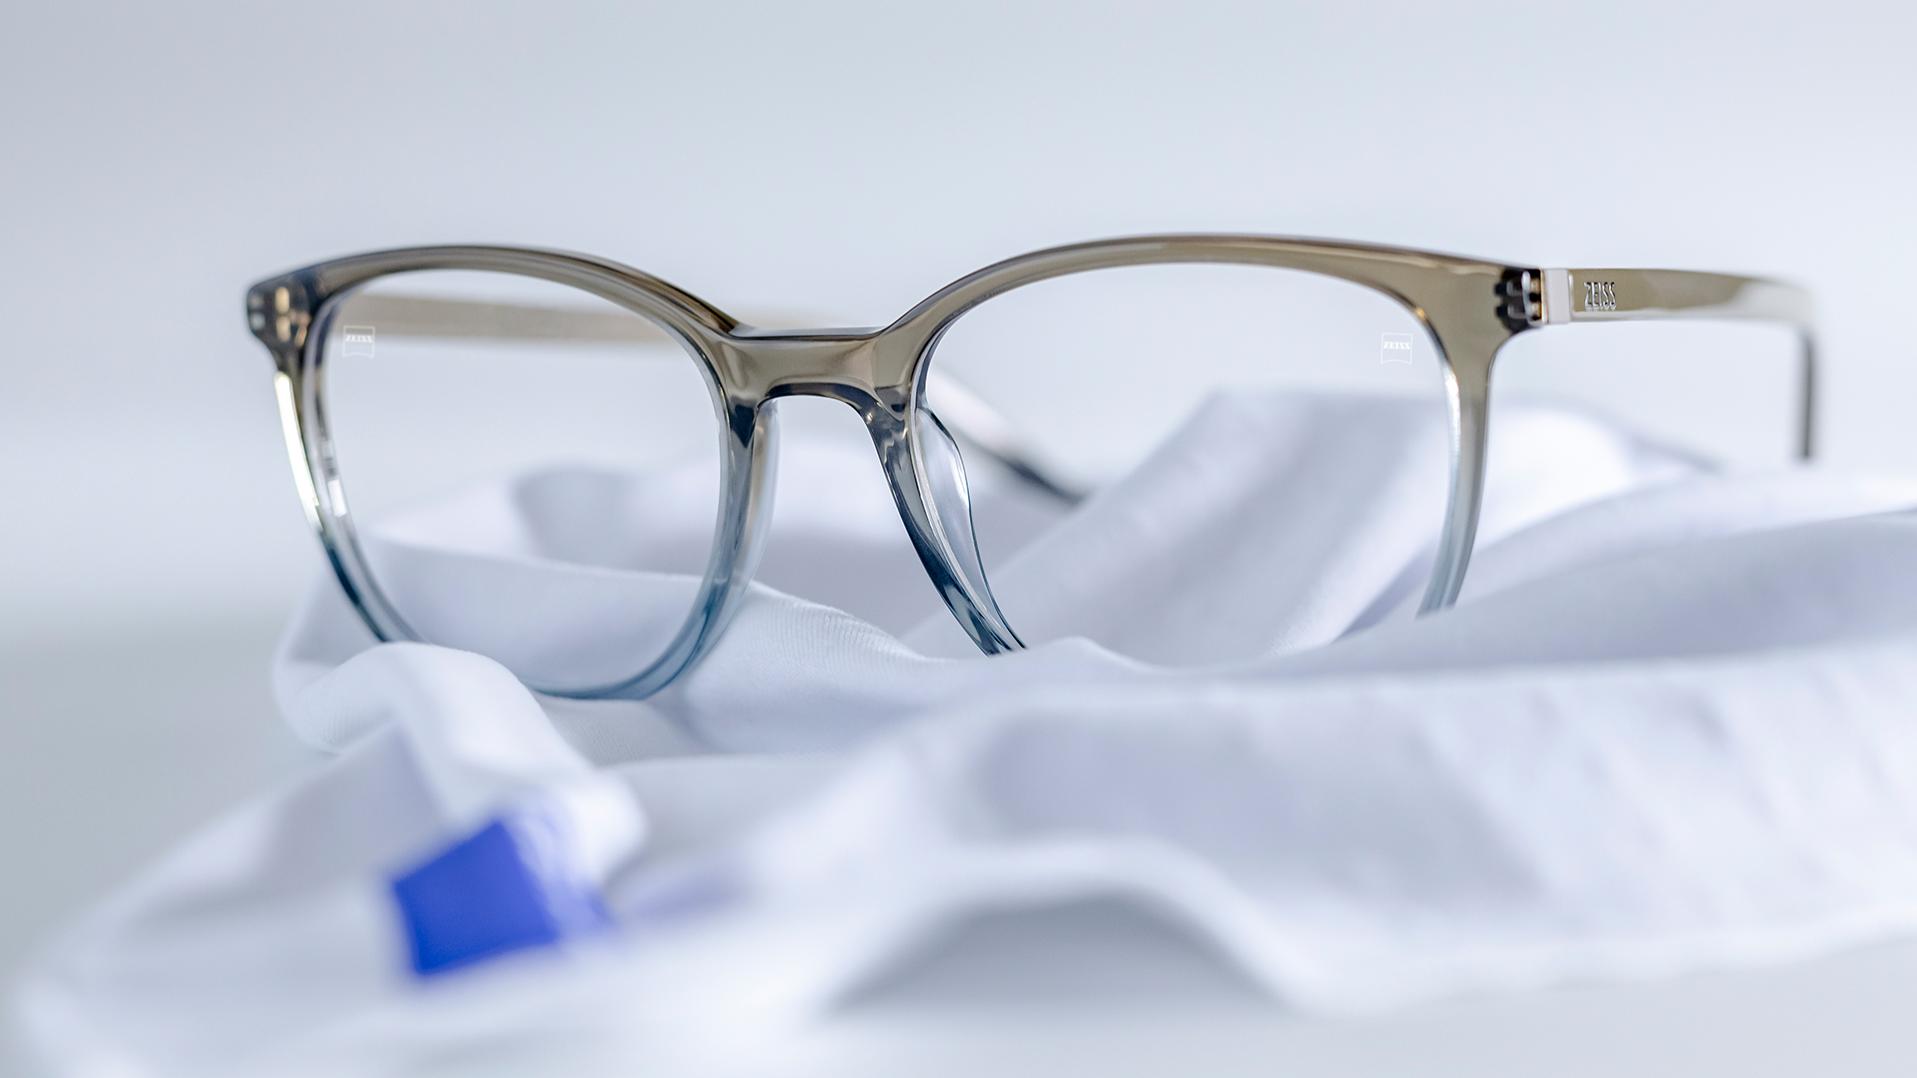 A pair of glasses with gray-blue frames and ZEISS lenses with DuraVision® coating lies on a white microfiber cloth.